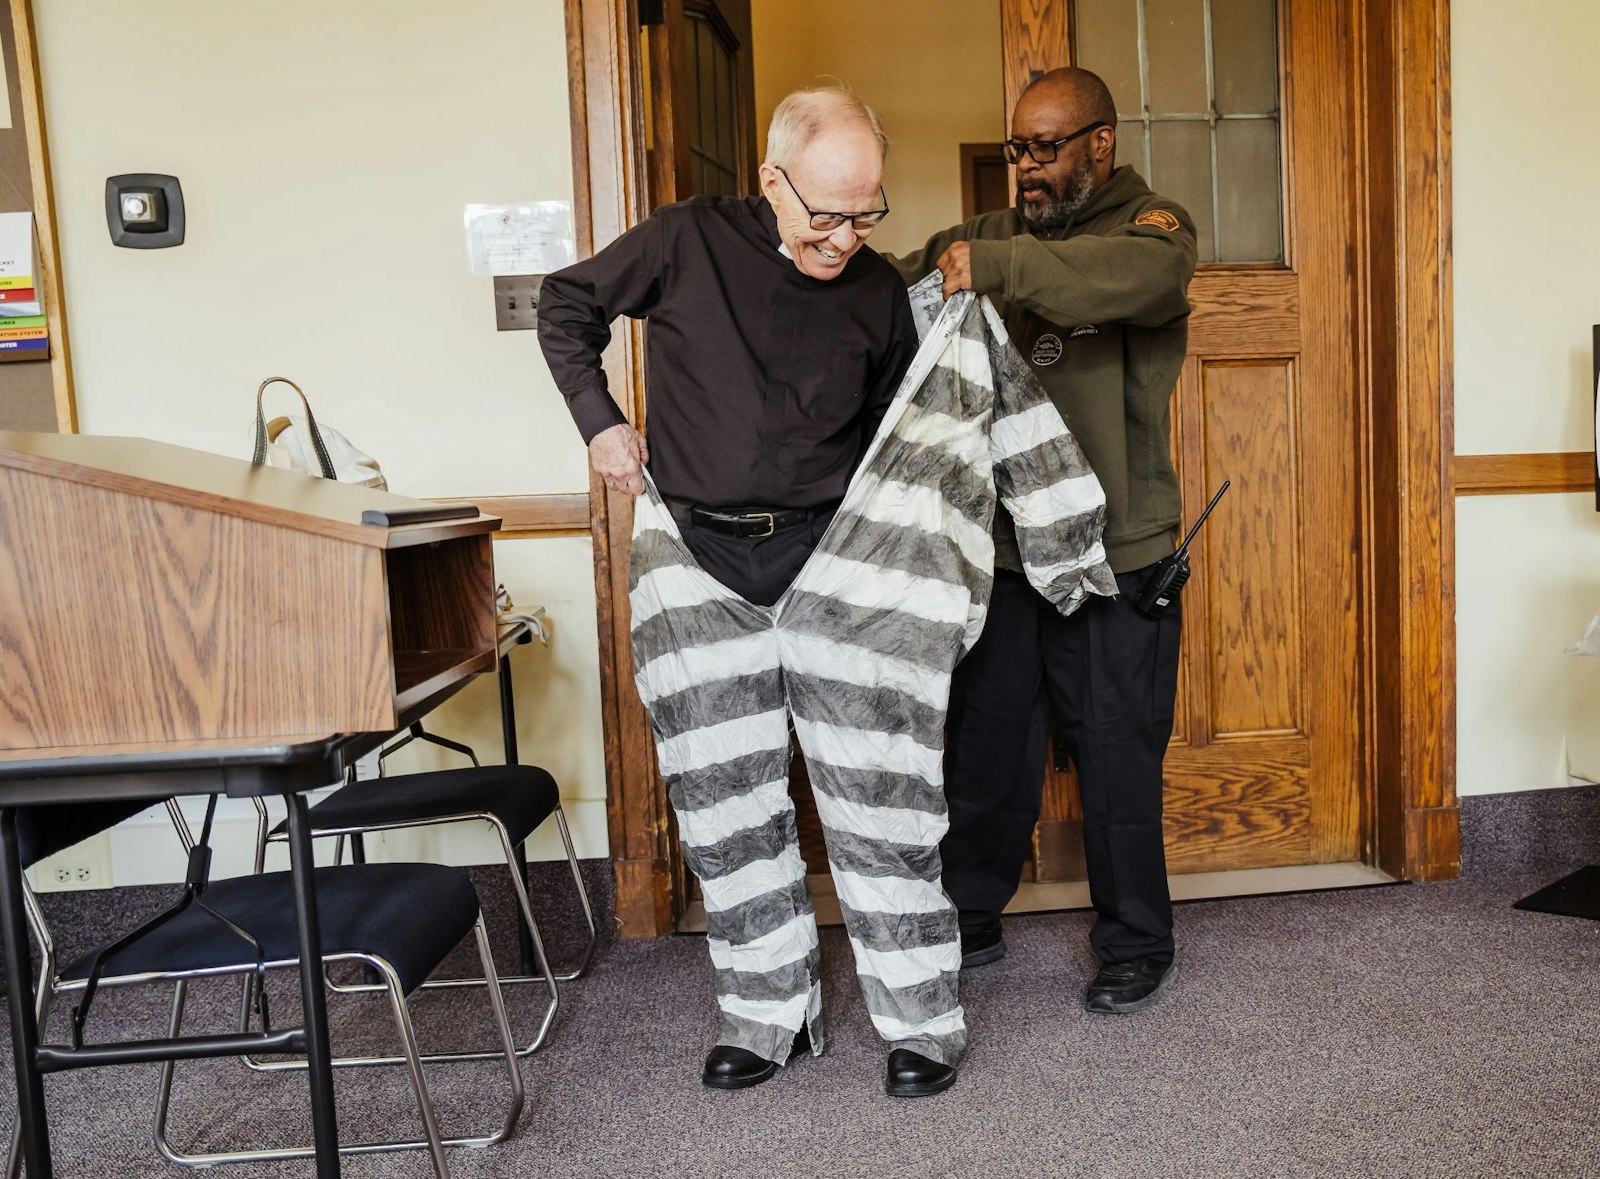 A security guard at Sacred Heart Major Seminary helps Fr. Cassidy don his "prisoner's clothing" for a photo shoot promoting Fr. Cassidy's latest book, "A Roman Commentary on St. Paul’s Letter to the Philippians," which details Paul's experience behind bars and the conditions under which he wrote his Letter to the Philippians.